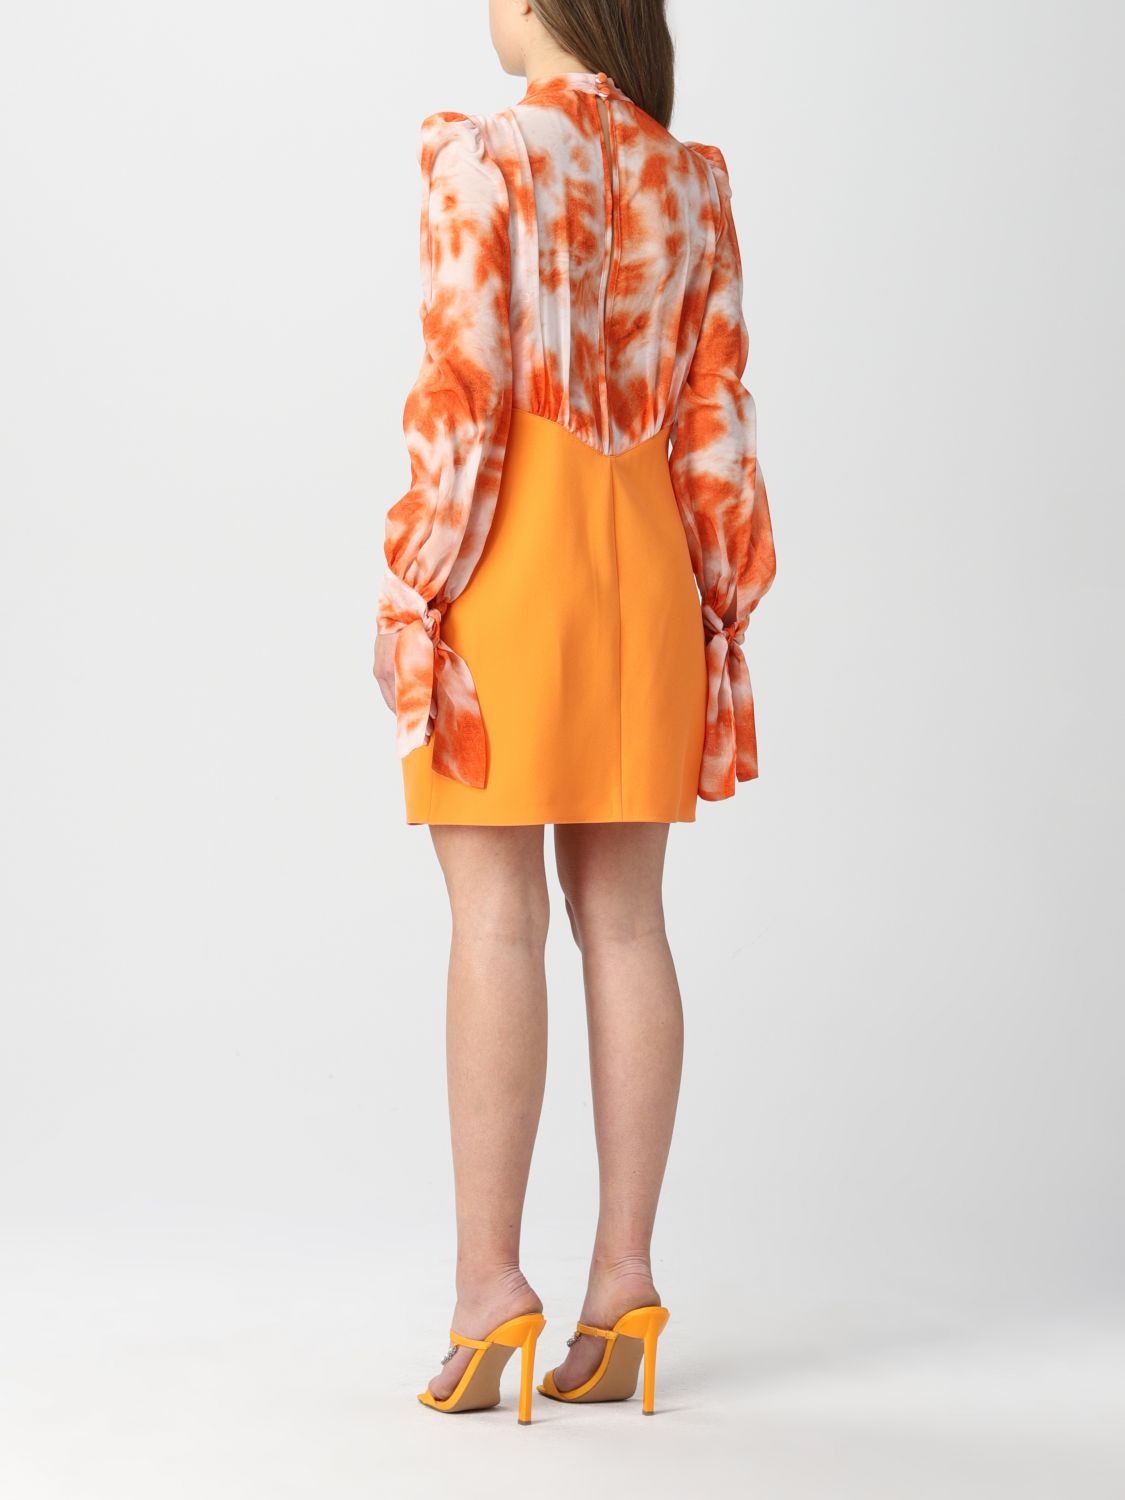 Womens Clothing Dresses Casual and day dresses Marco Bologna Dress in Orange 